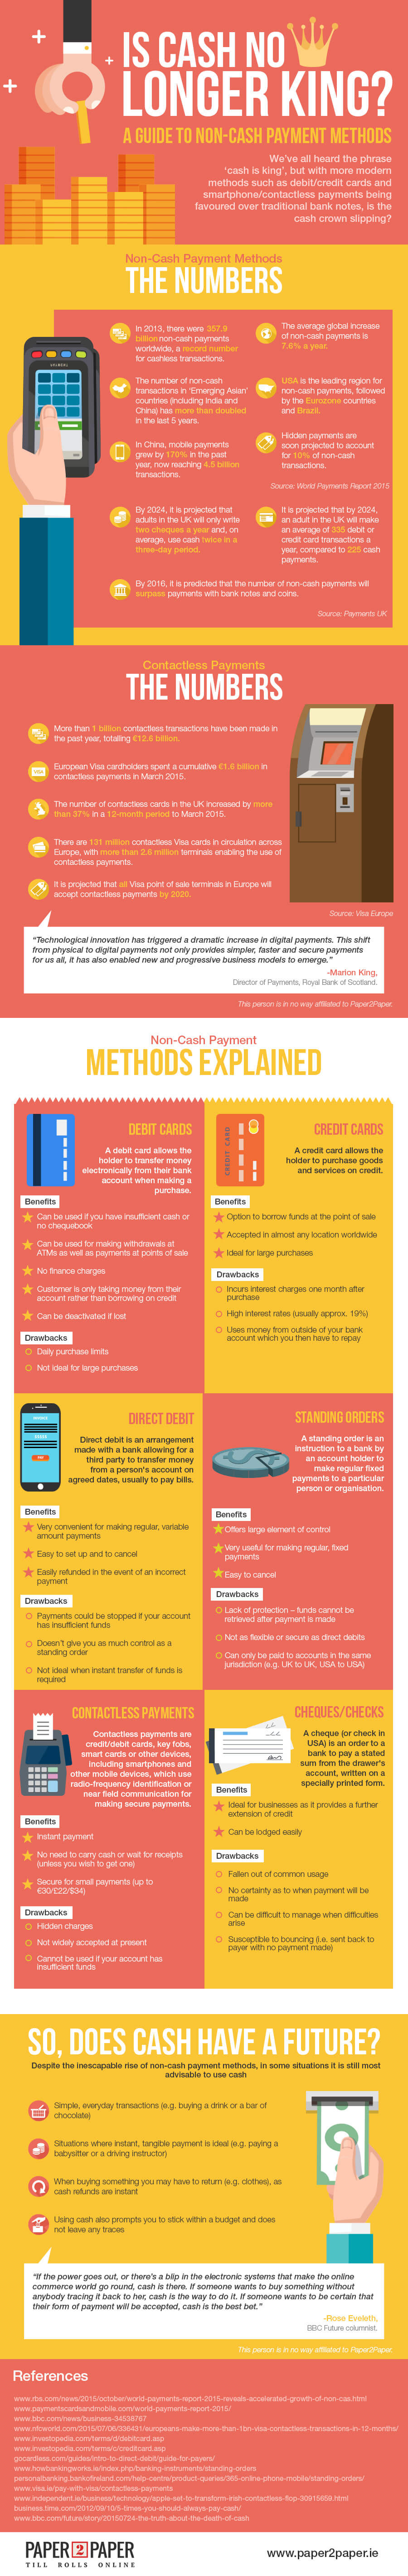 Non-Cash-Payment-Methods-guide-infographic